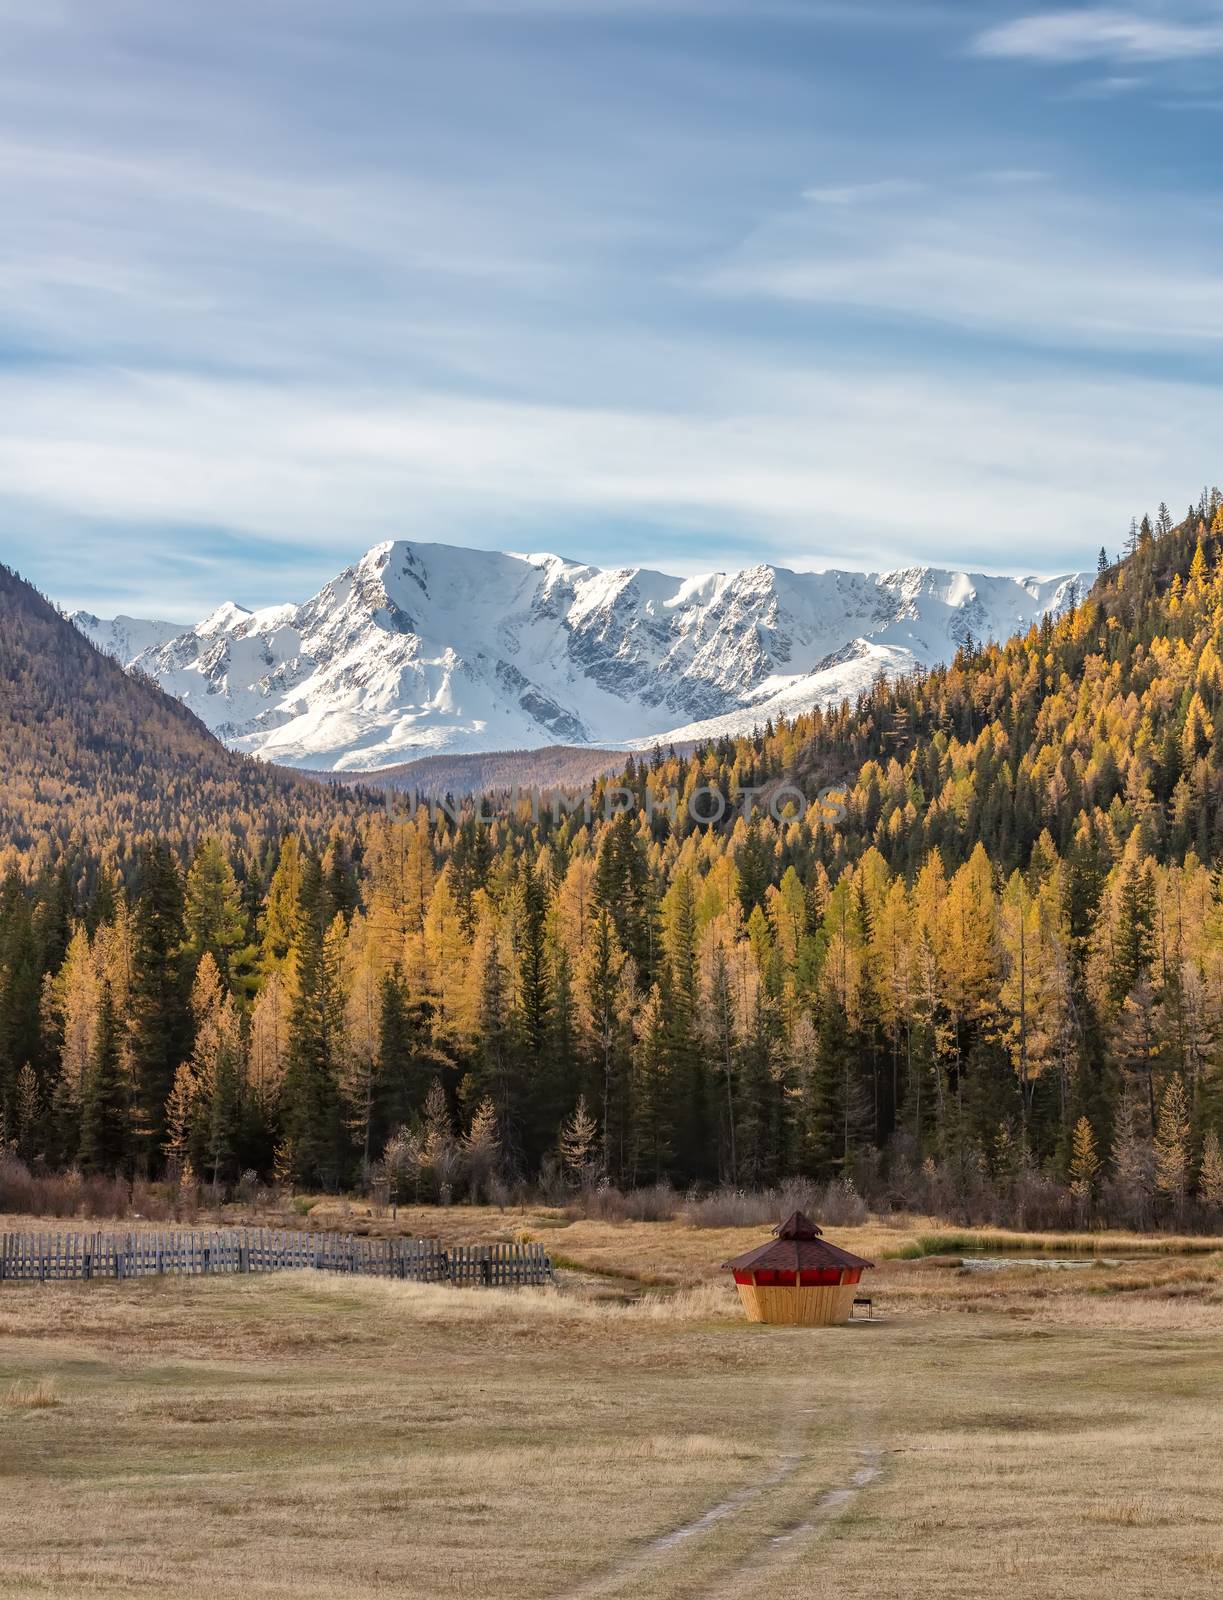 Scenic low angle view of snowy mountain peaks and slopes of North Chuyskiy ridge. Golden trees, wooden hut in the foreground. Beautiful blue cloudy sky as a backdrop. Altai mountains, Siberia, Russia.